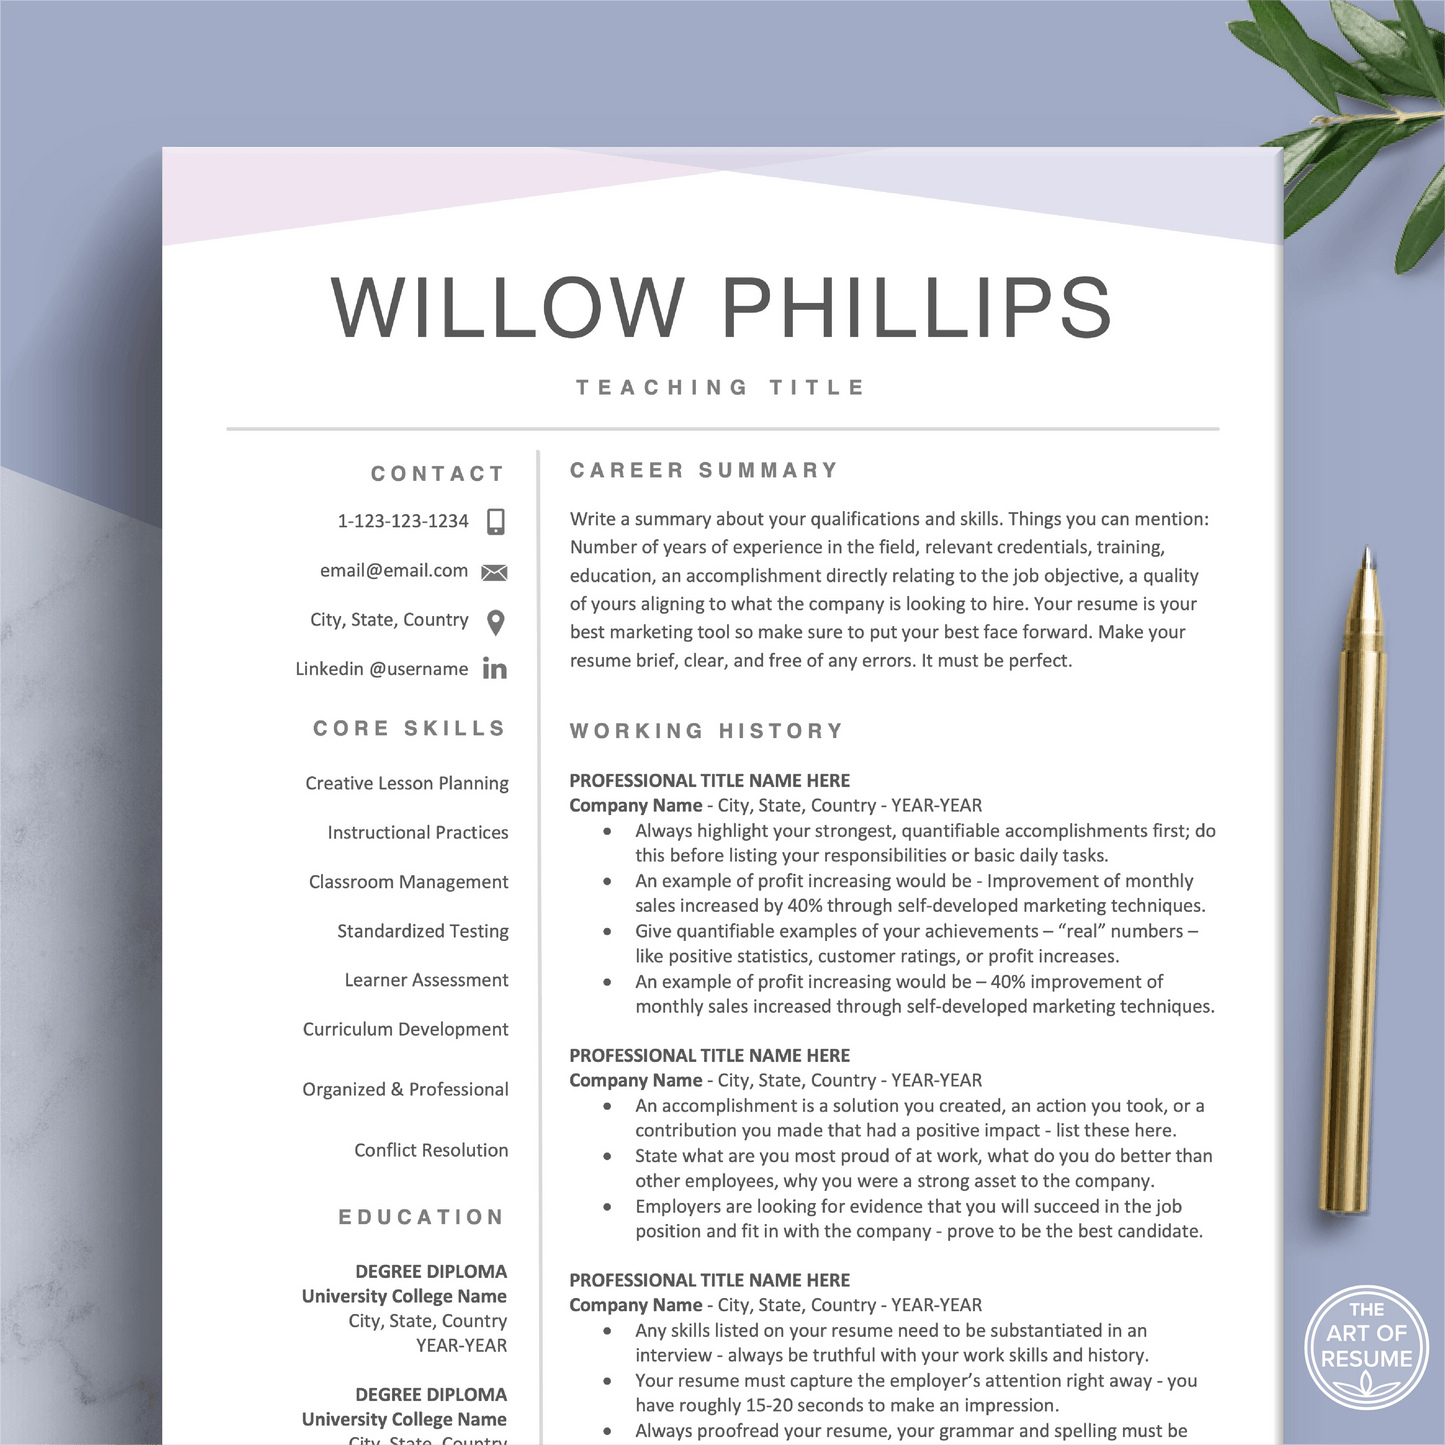 Resume Template Maker | Fully Editable Resume Template | Executive CV Download